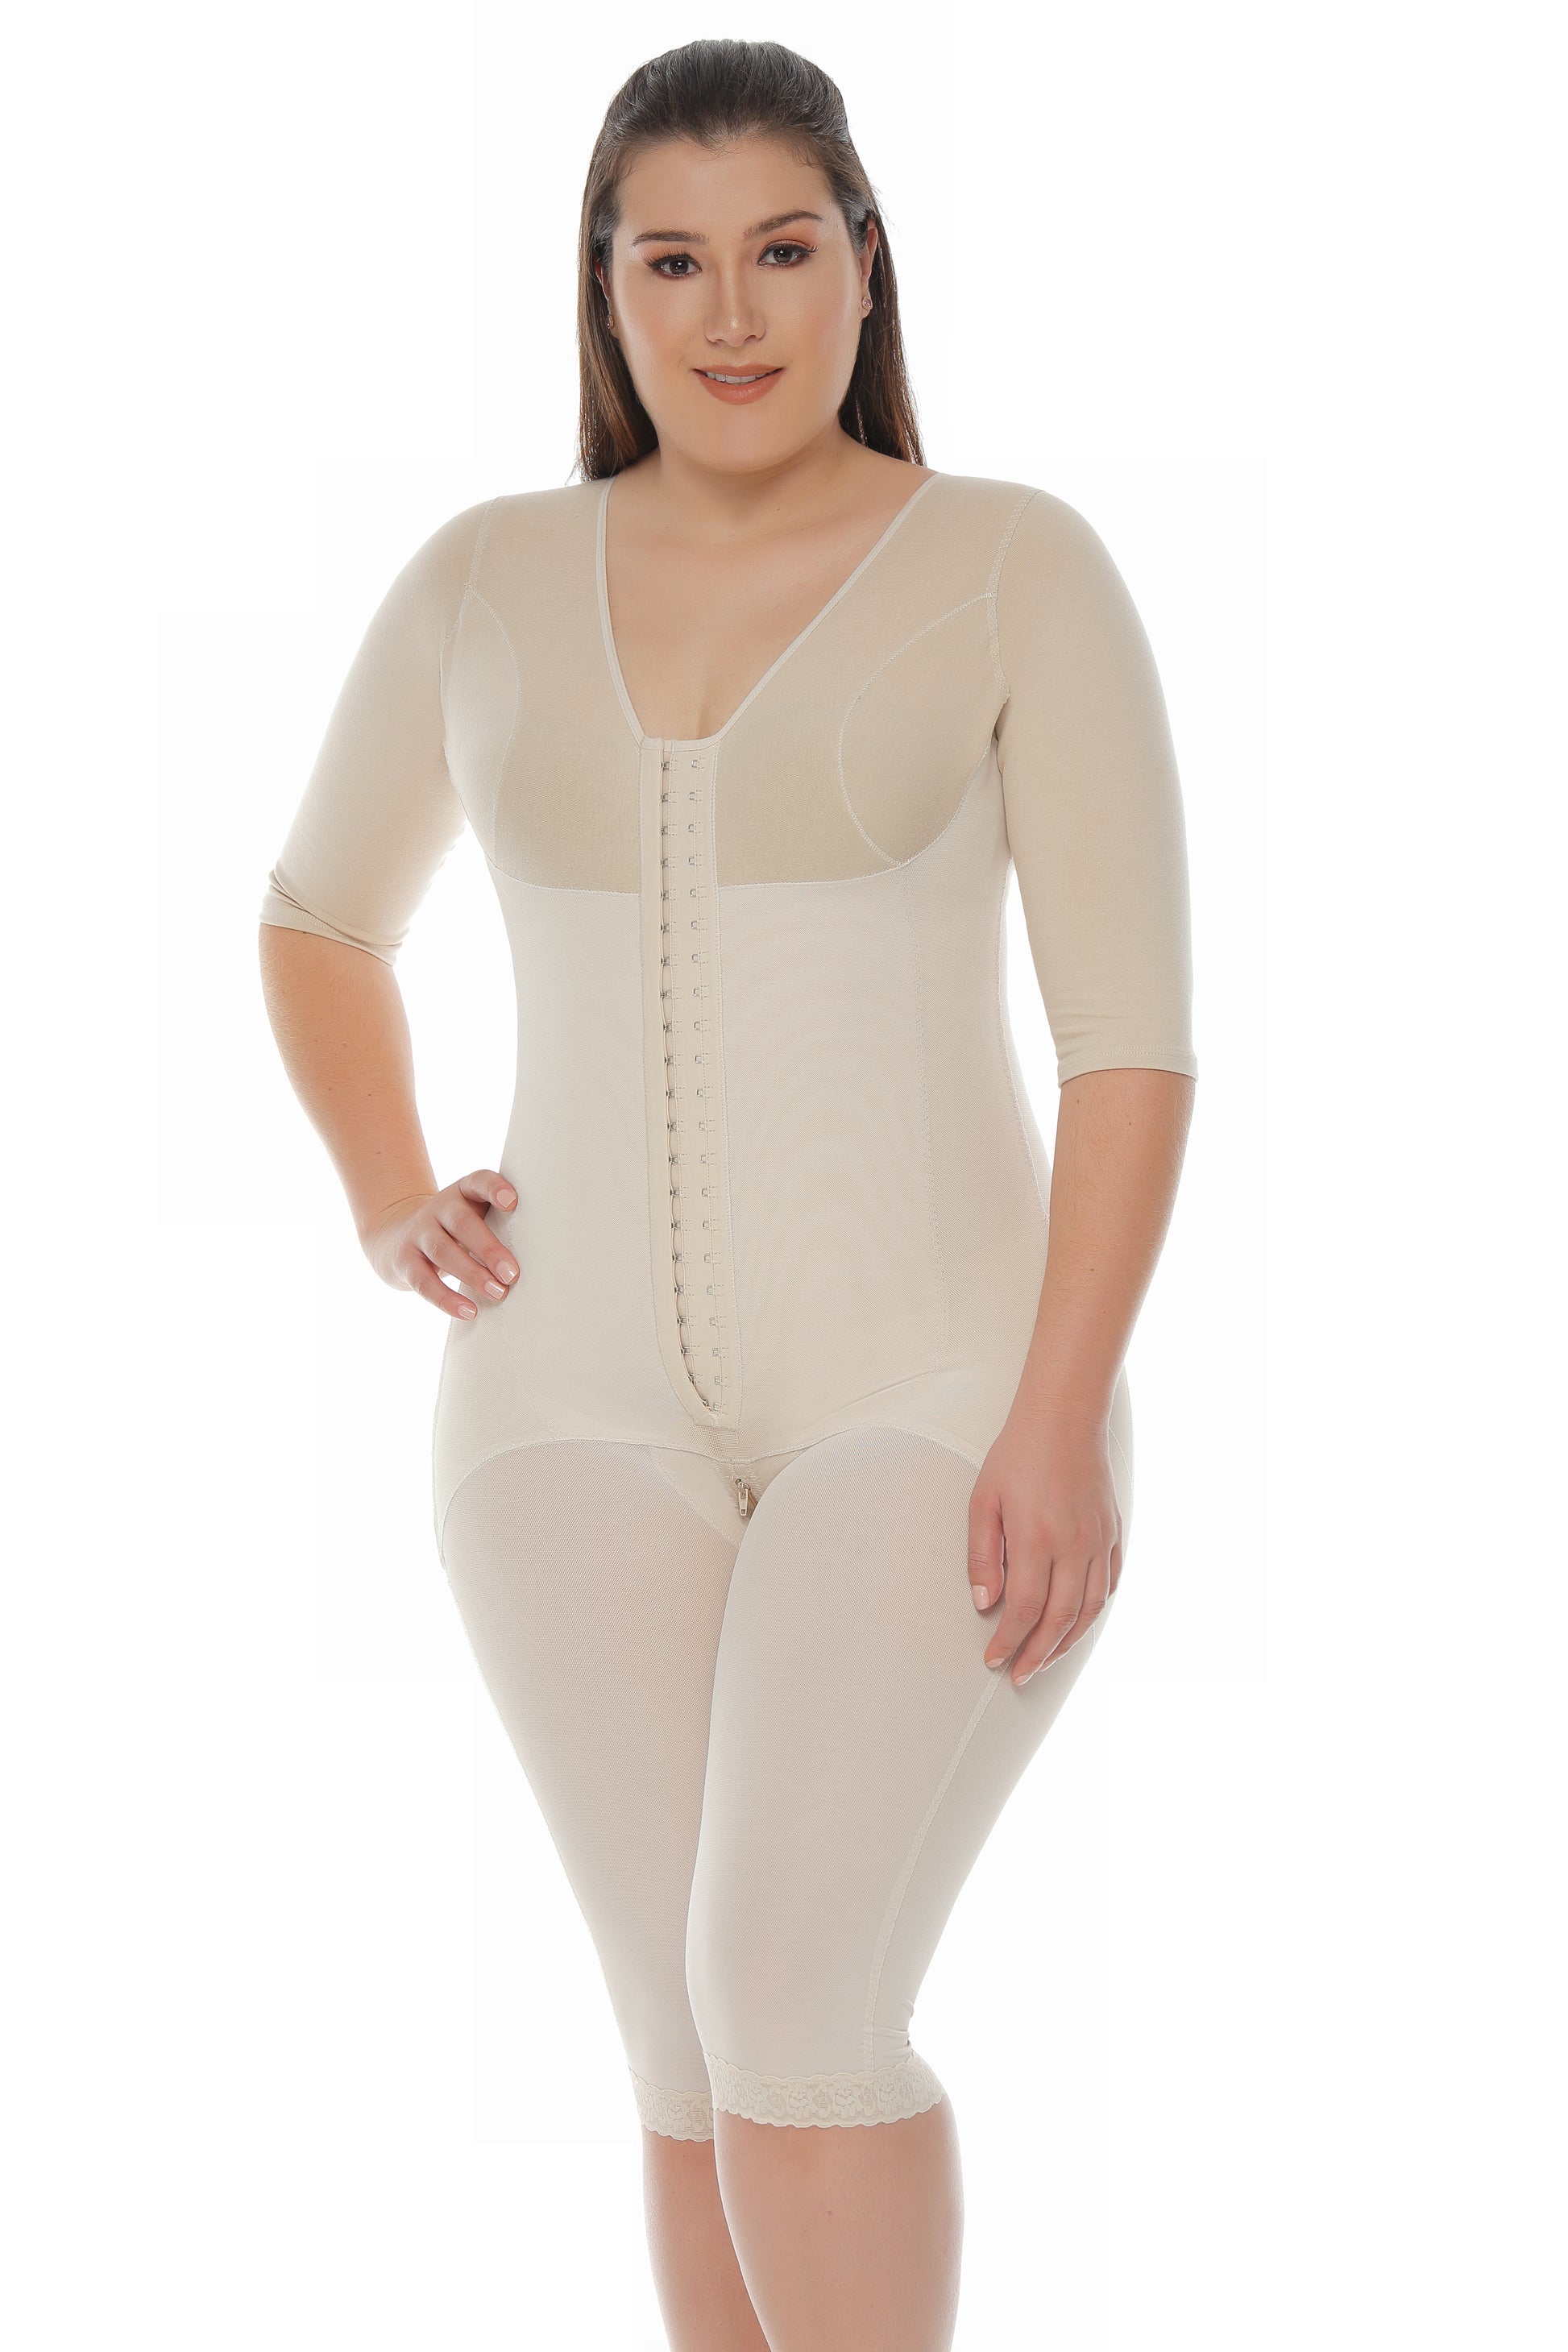 Post Op Shapewear With Sleeves and Bra Bodysuit